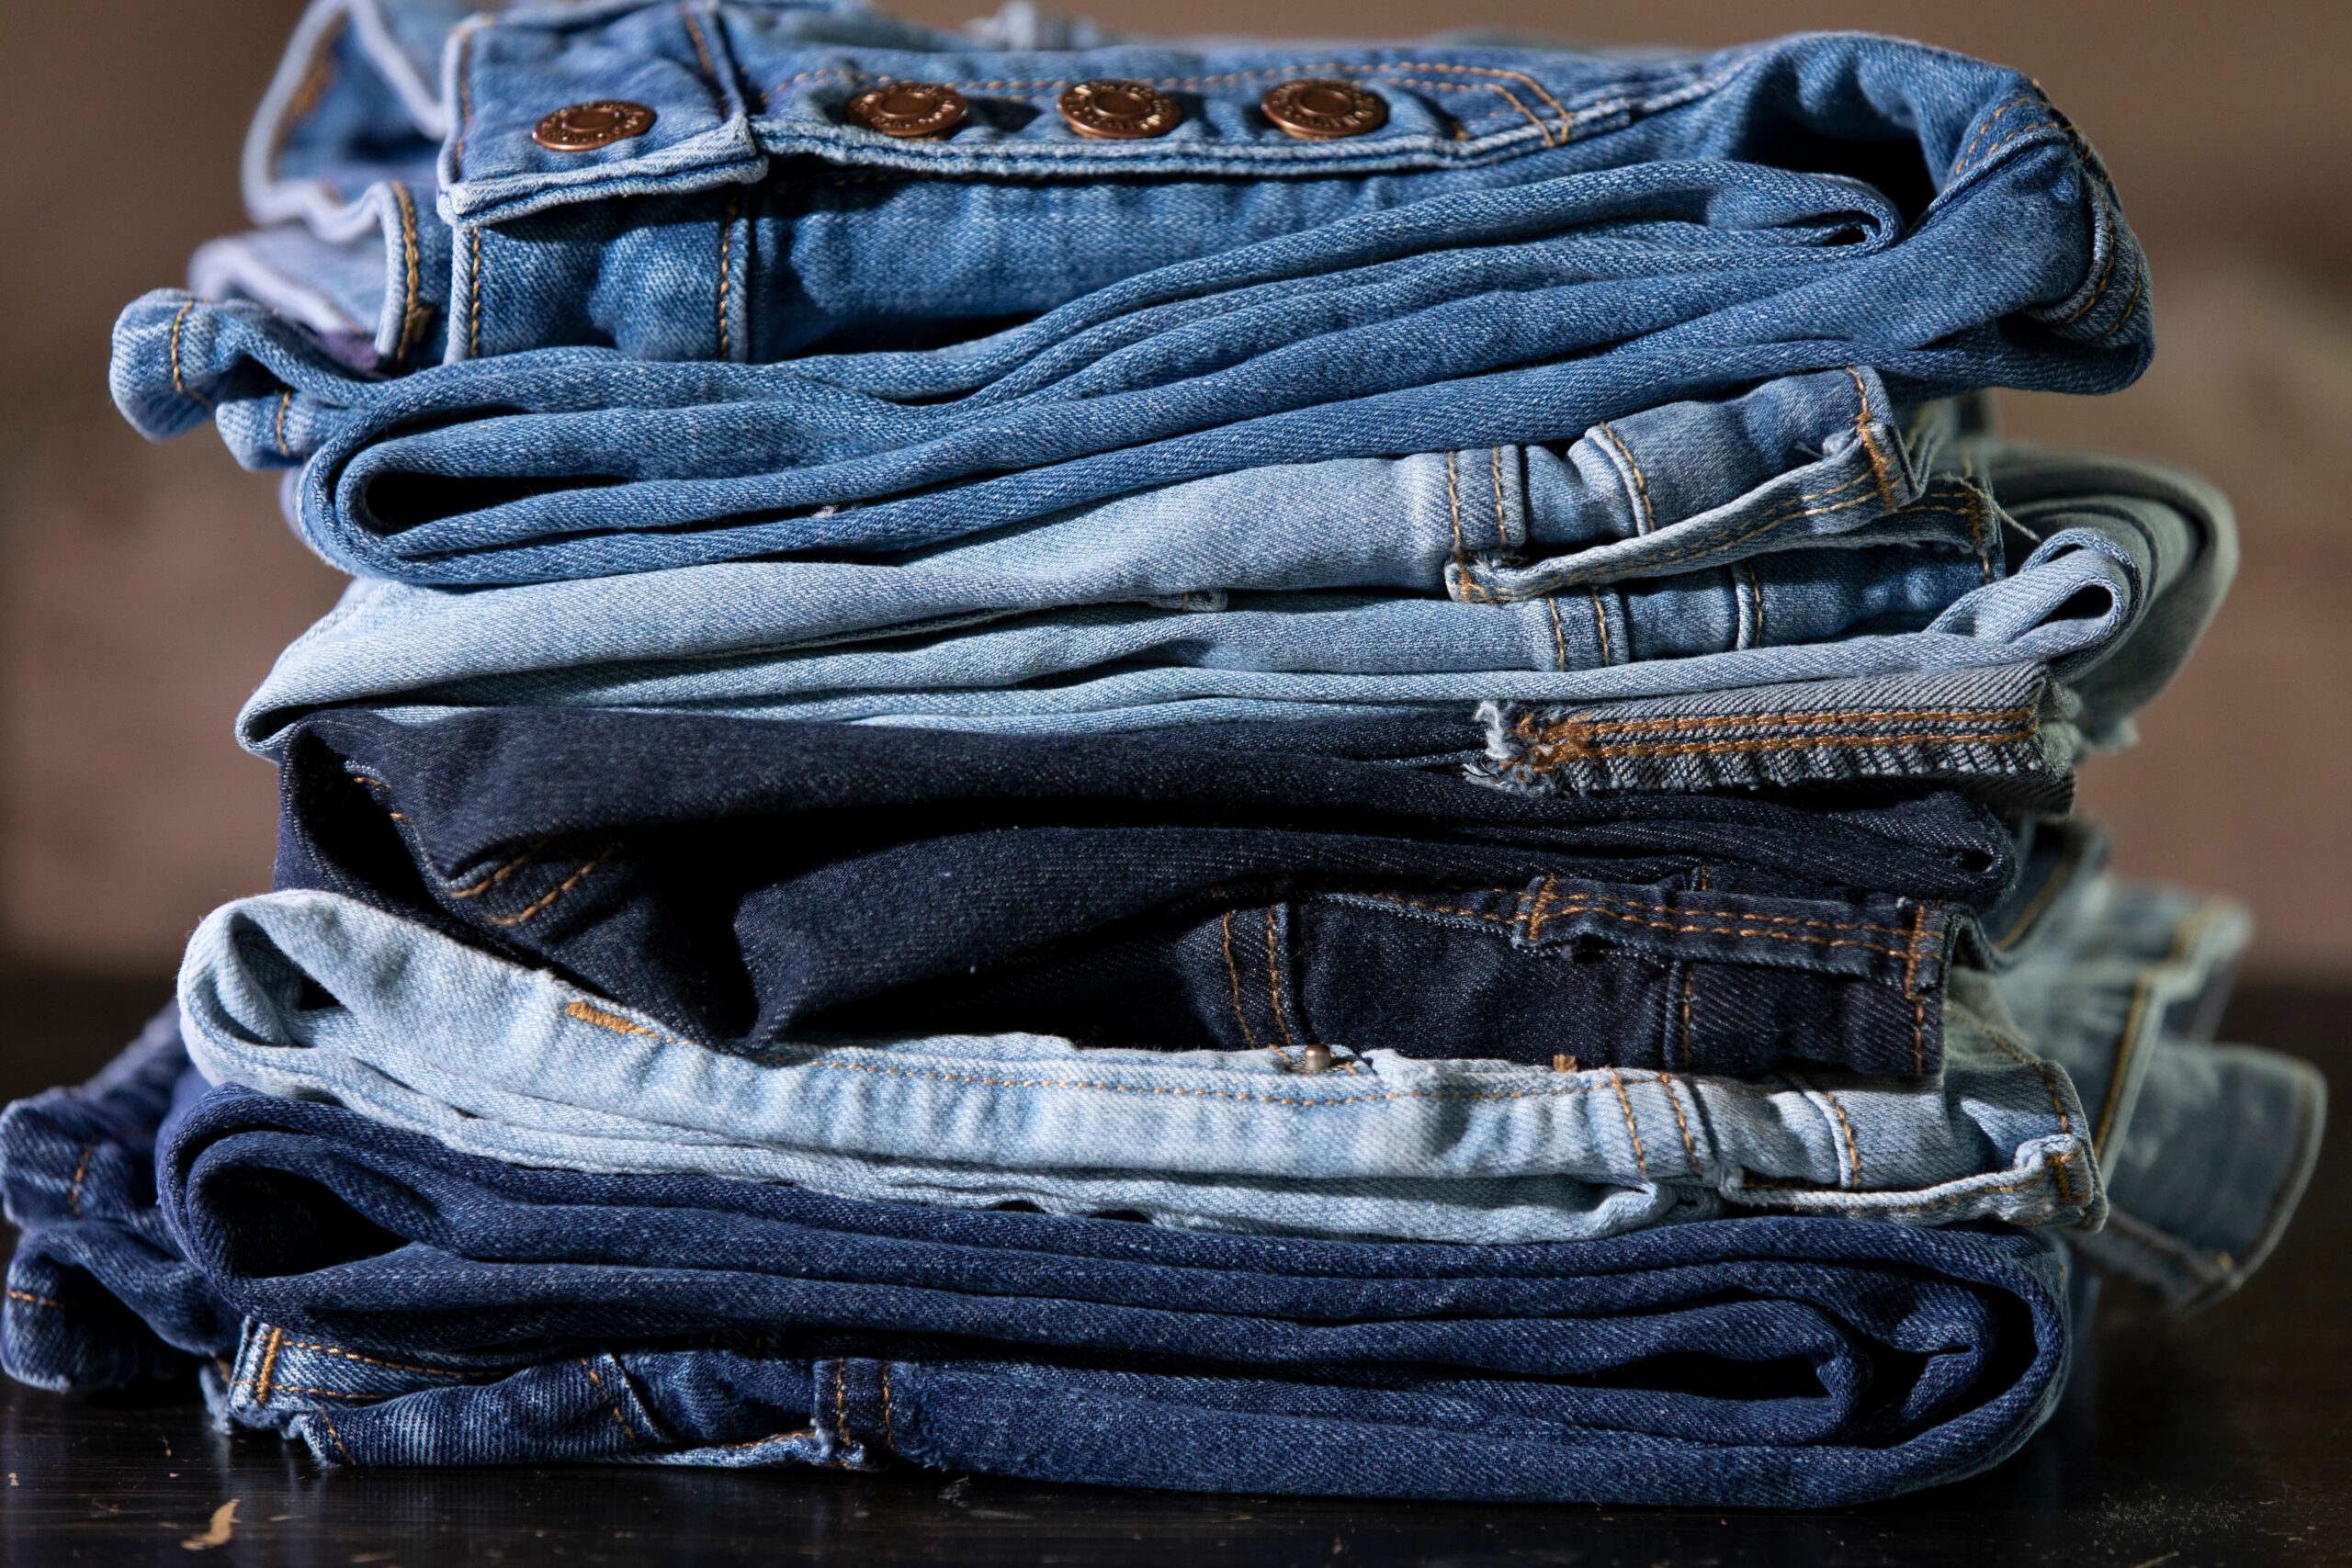 A stack of folded bluejeans